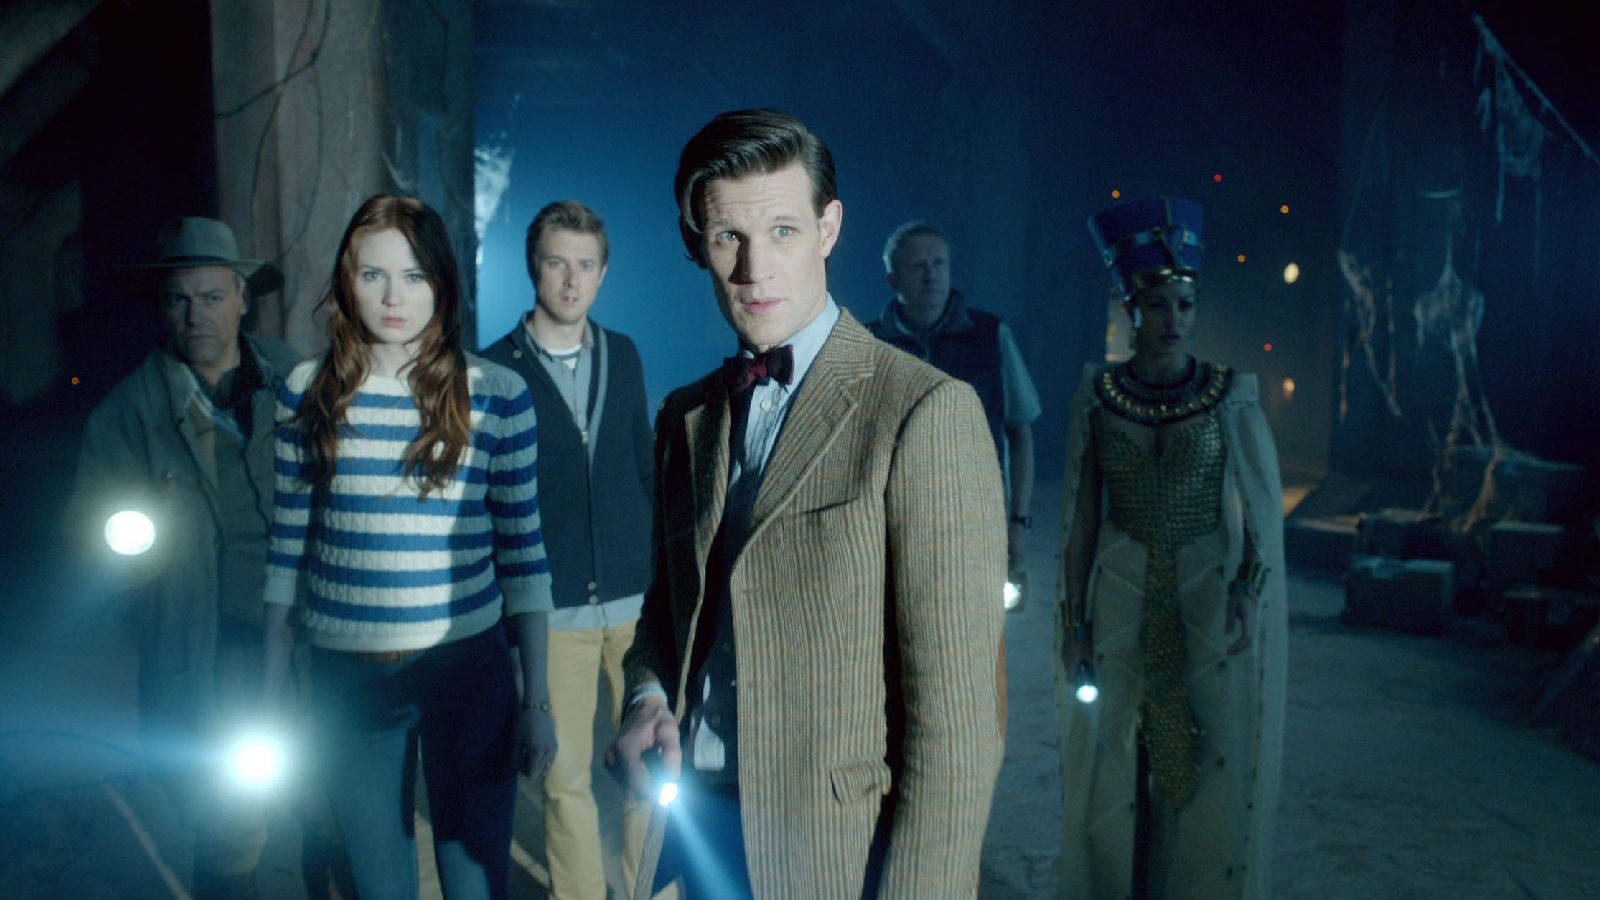 Dinosaurs On A Spaceship - Doctor Who Season 11 Doctor - HD Wallpaper 